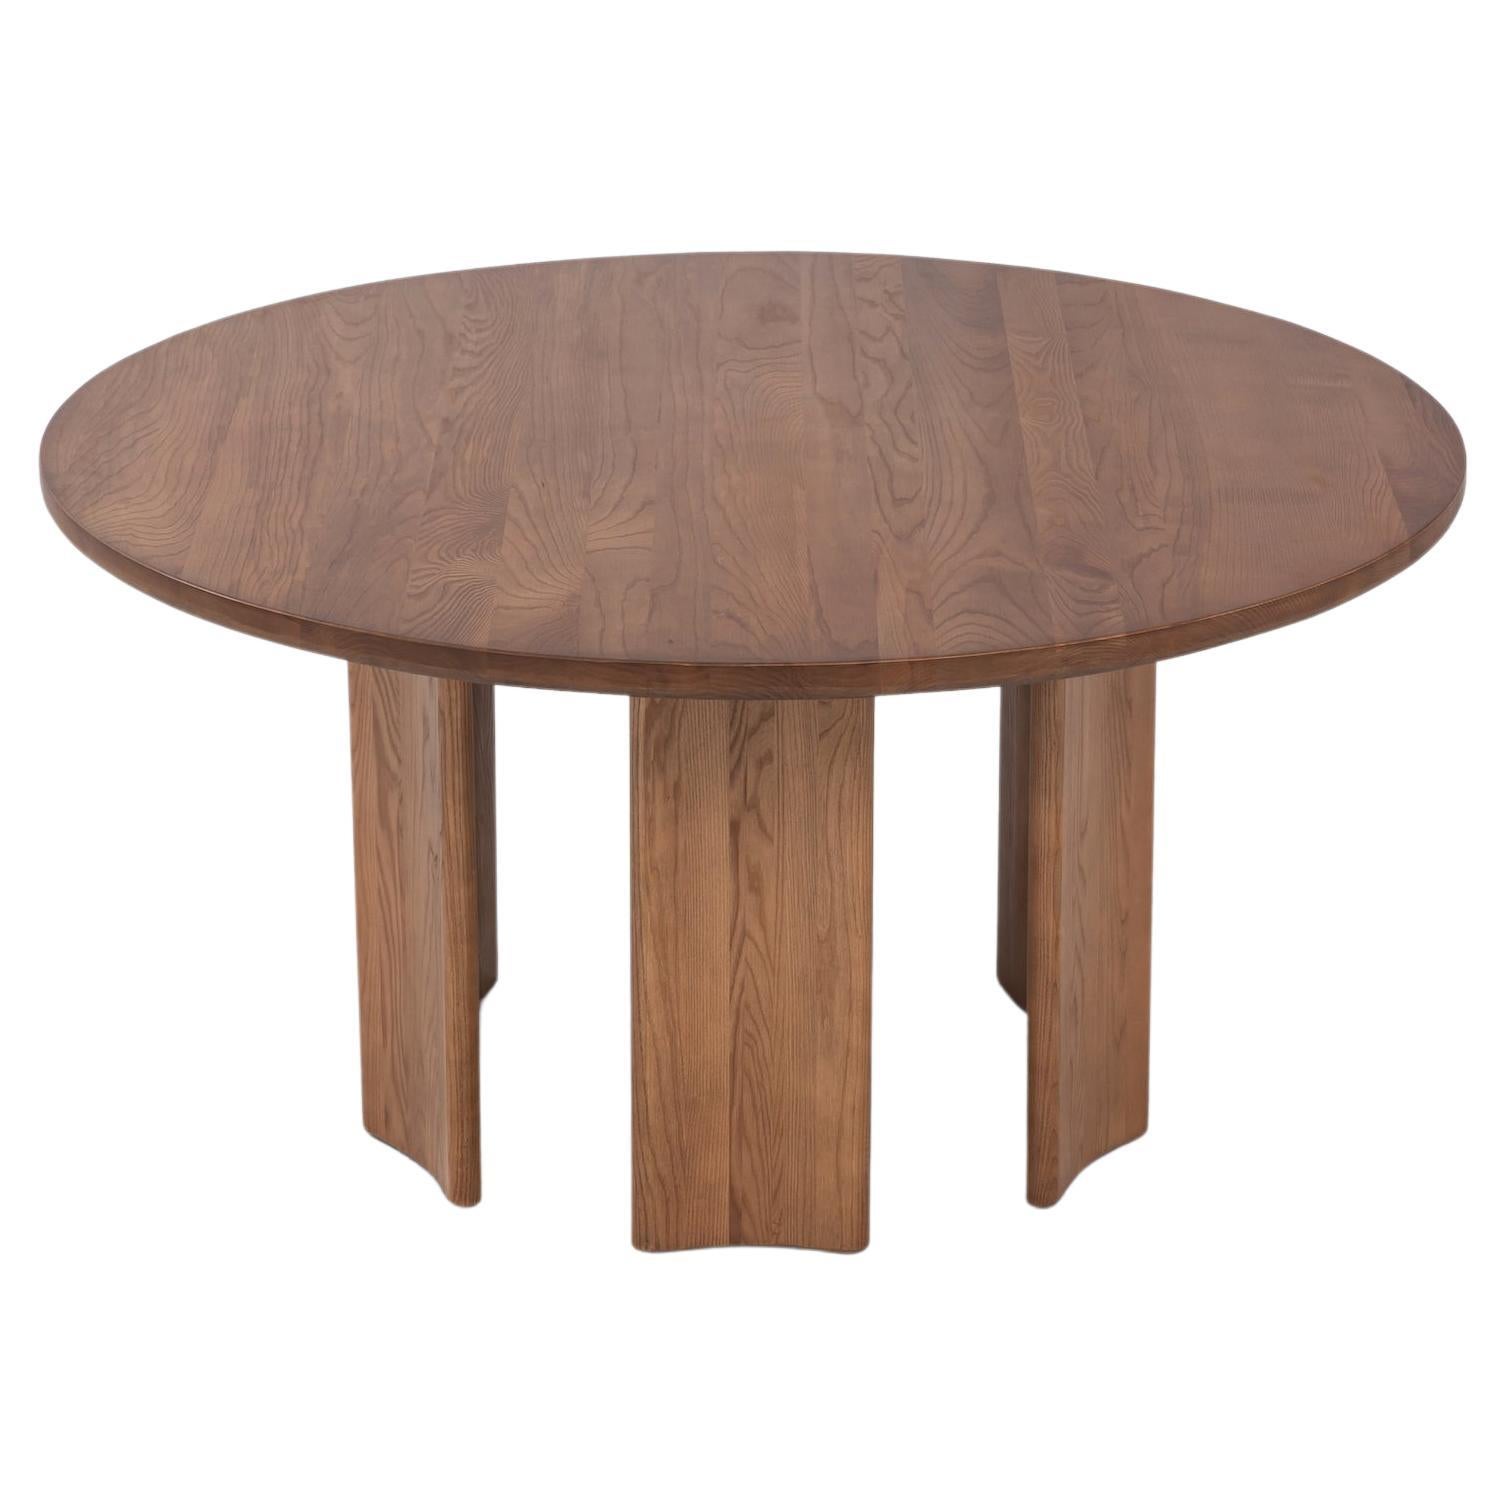 Crest Table Round in Sienna, Minimalist Dining Table in Wood For Sale